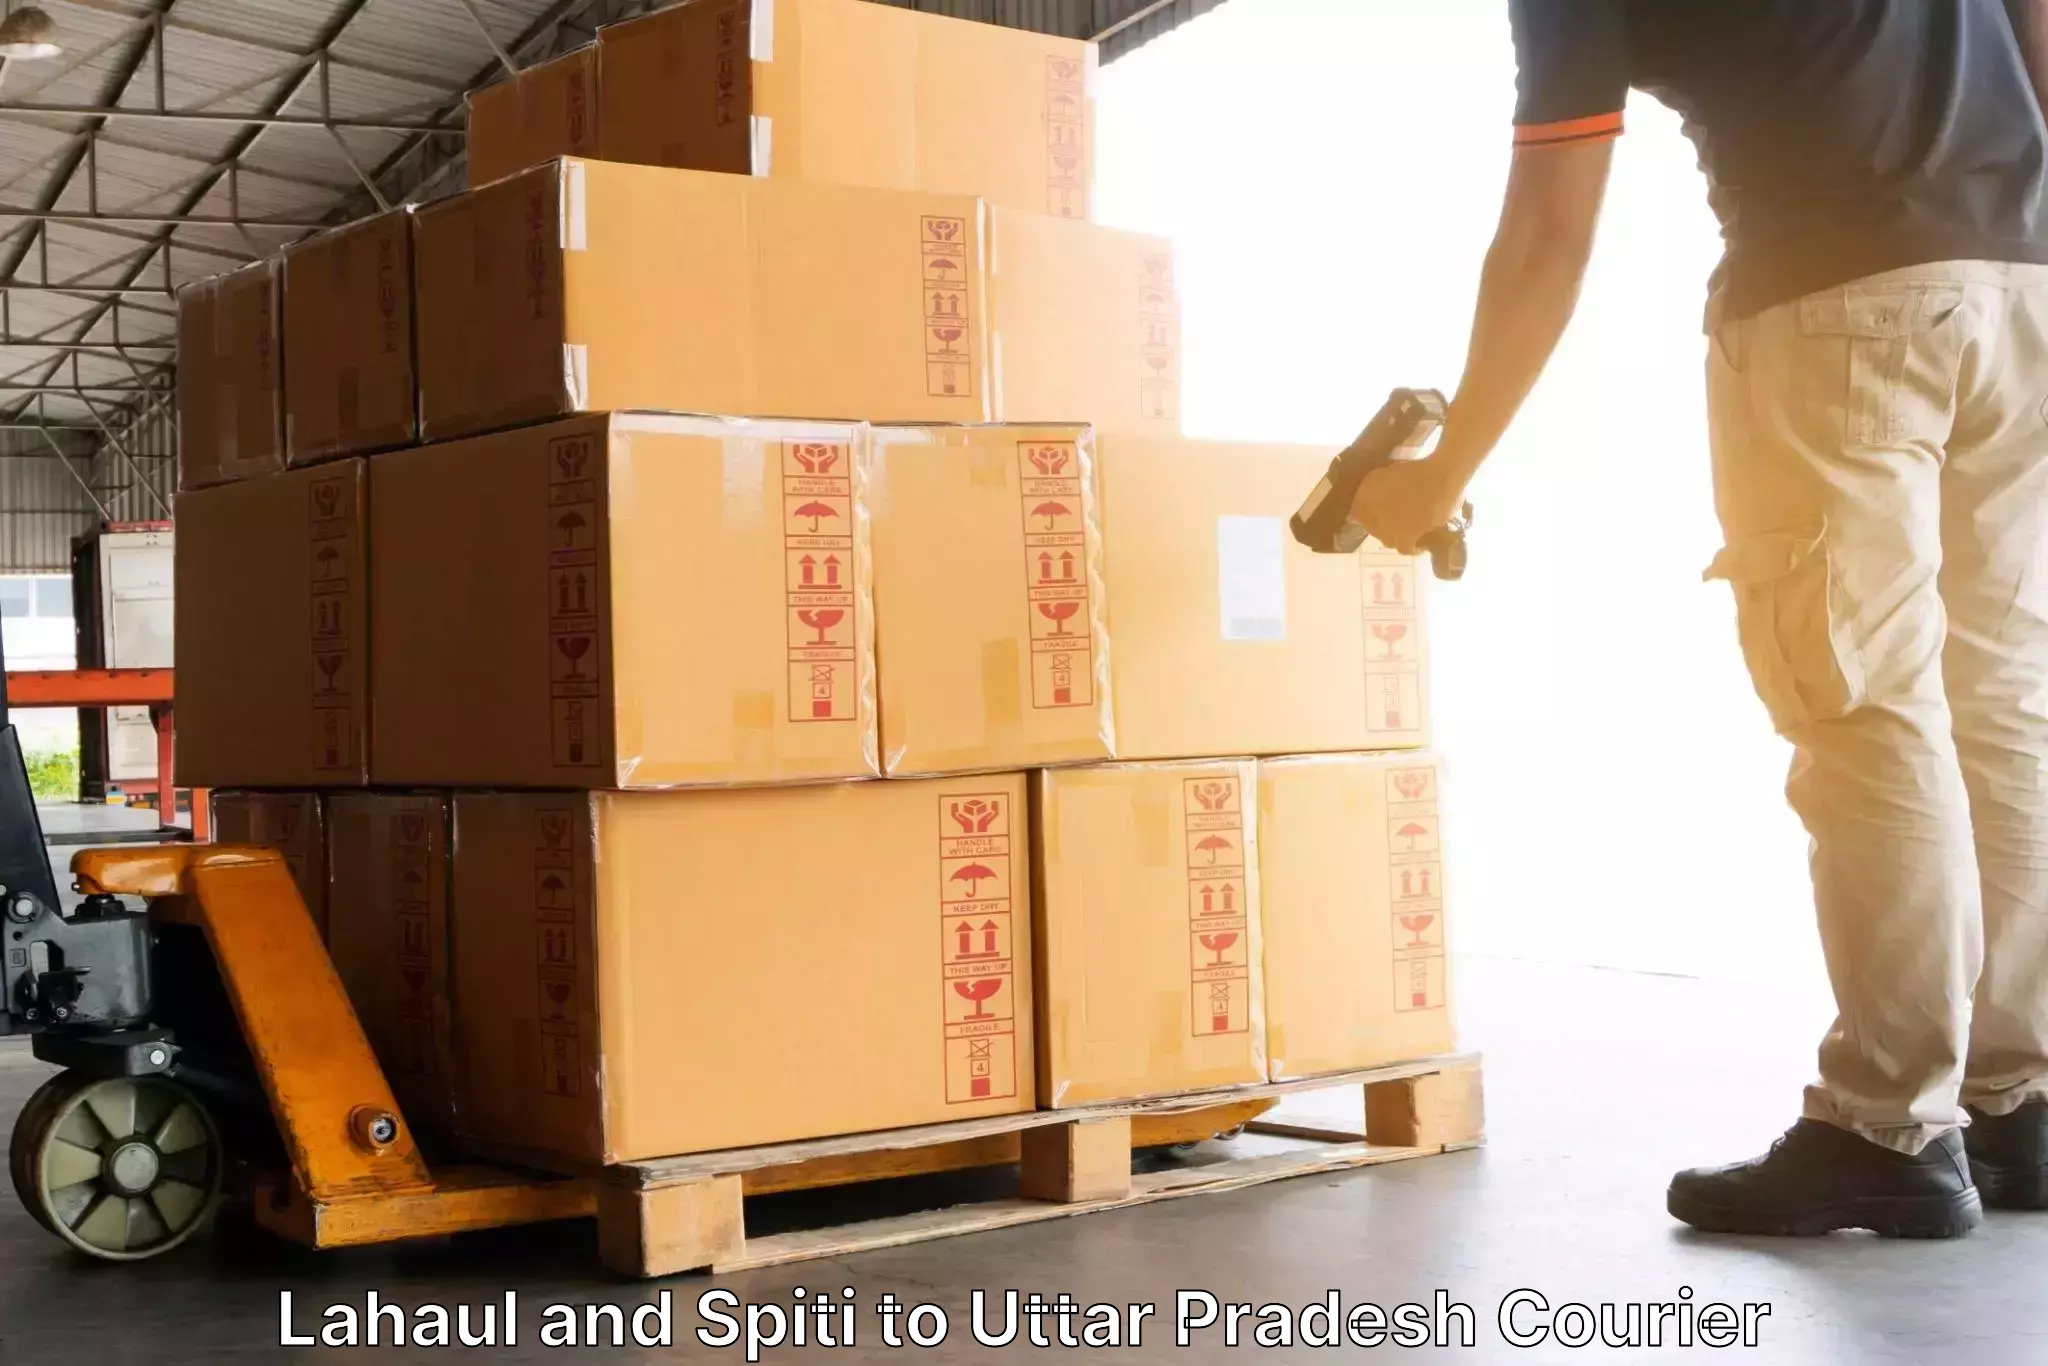 Customer-focused courier Lahaul and Spiti to Jhansi